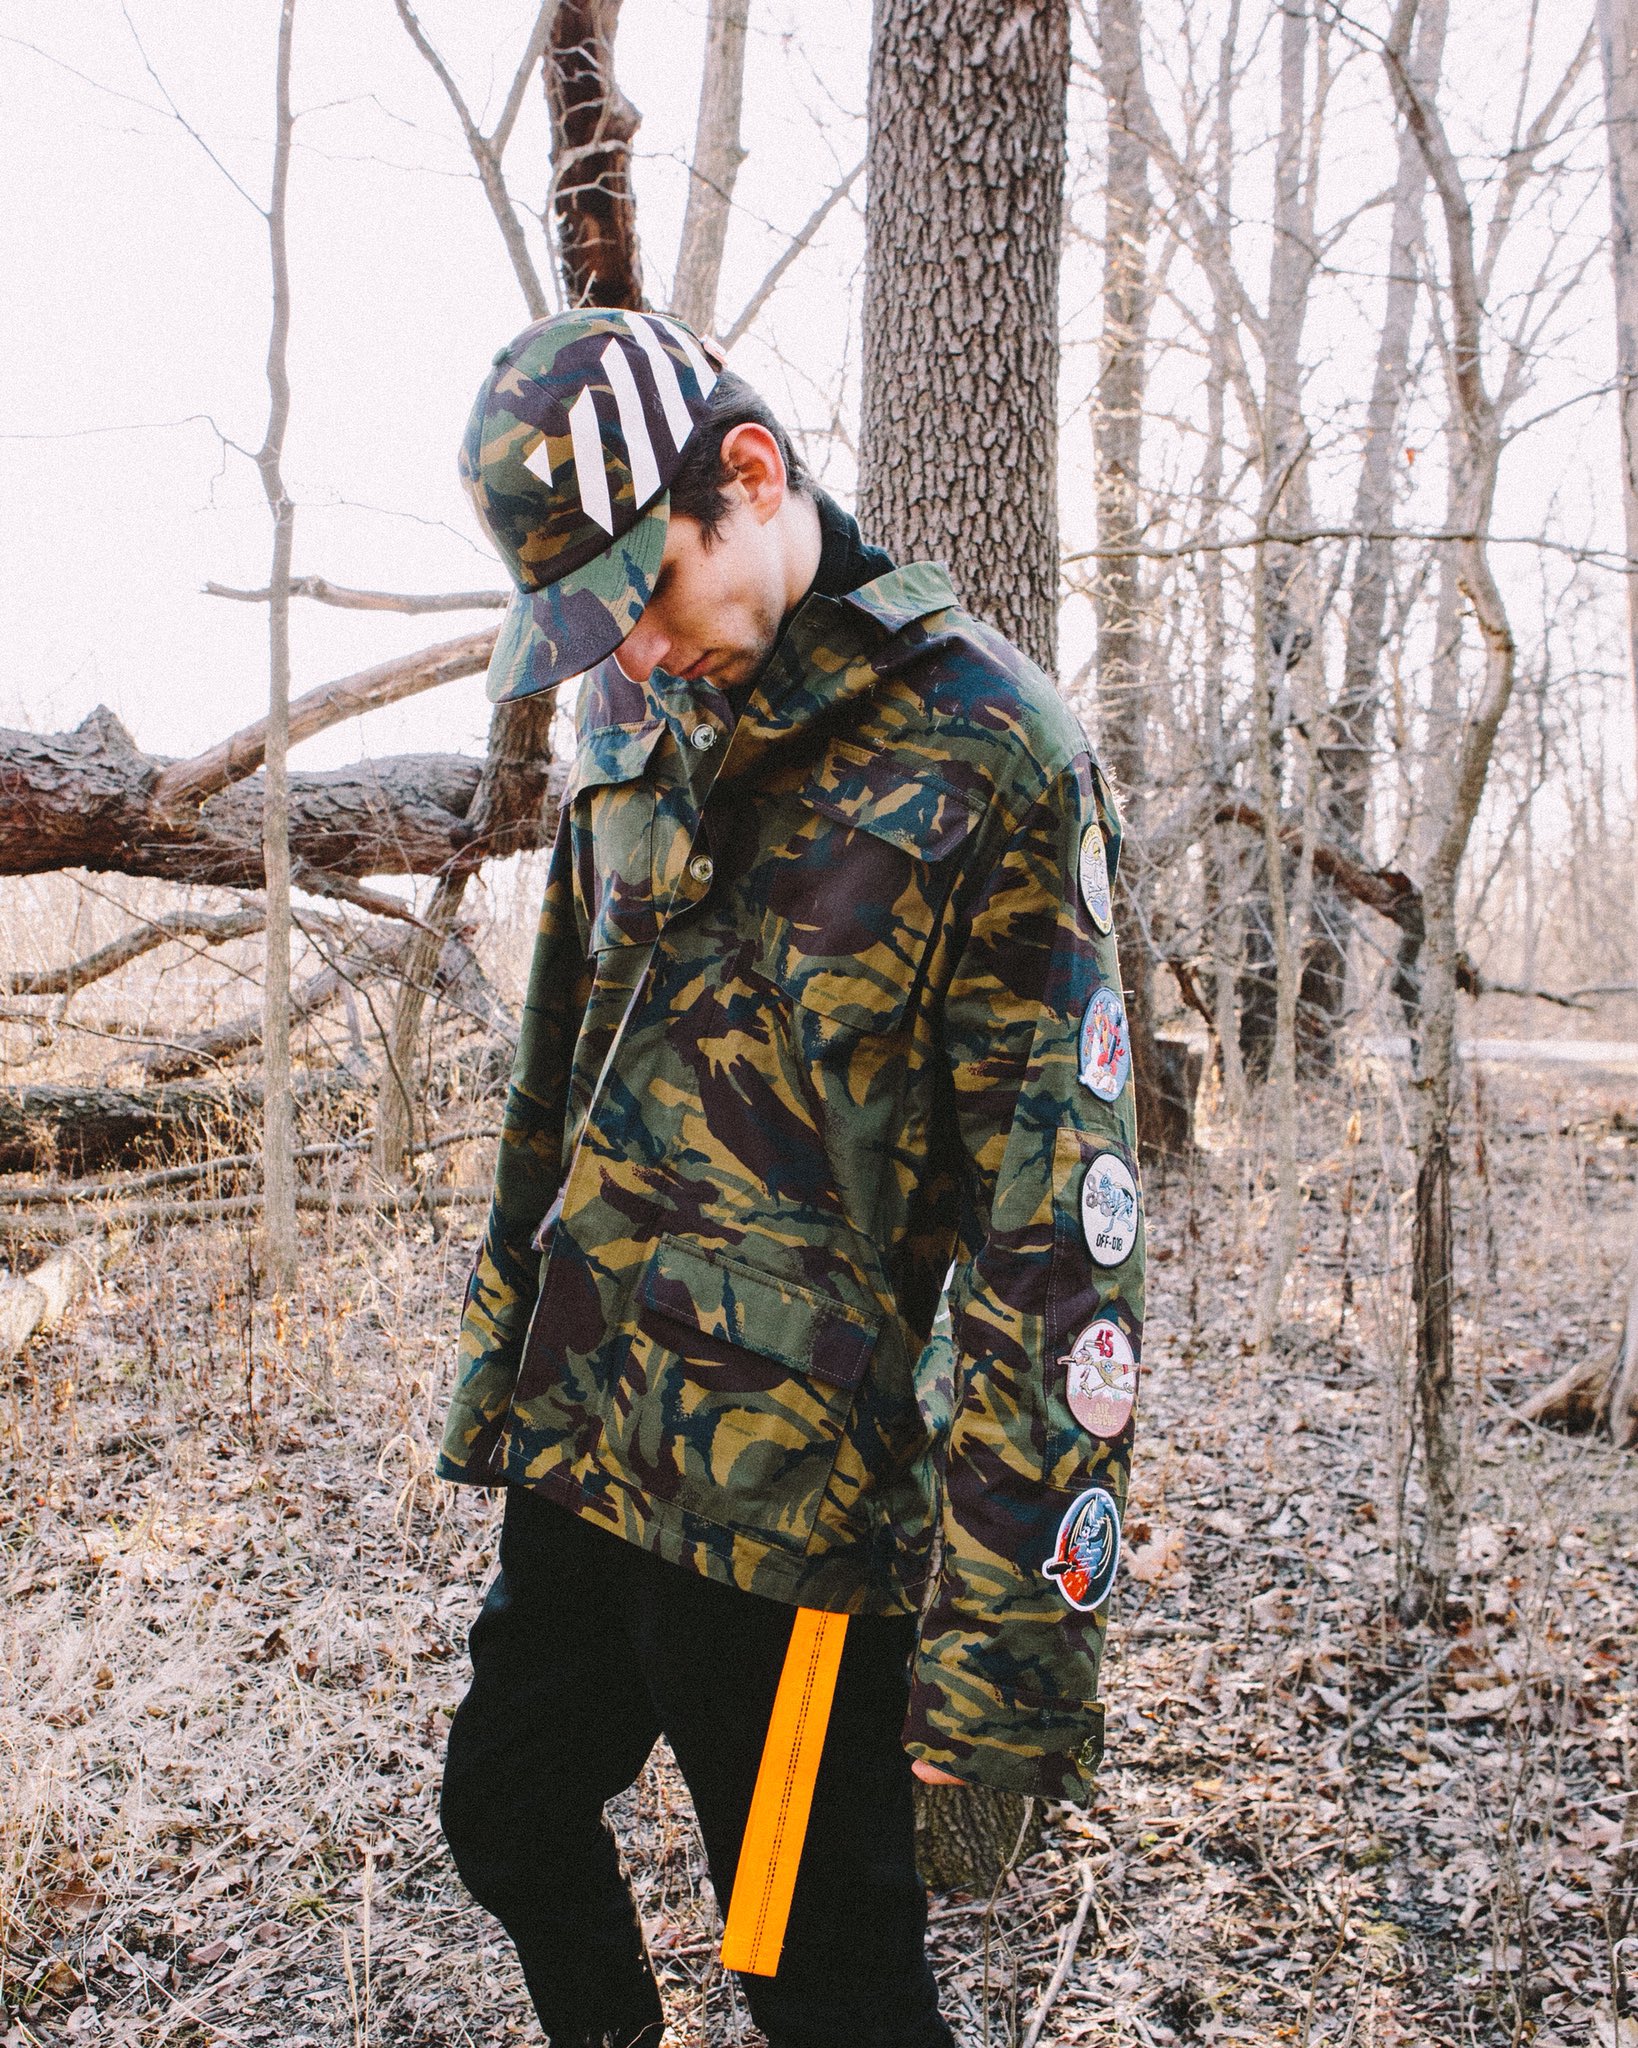 RSVP Gallery on Twitter: "Off-White Camo Field Jacket &amp; Diagonal Stripe Cap 🦌 Shop the rest of @OffWht c/o @virgilabloh SS18 Collection in the &amp; Chicago stores and at